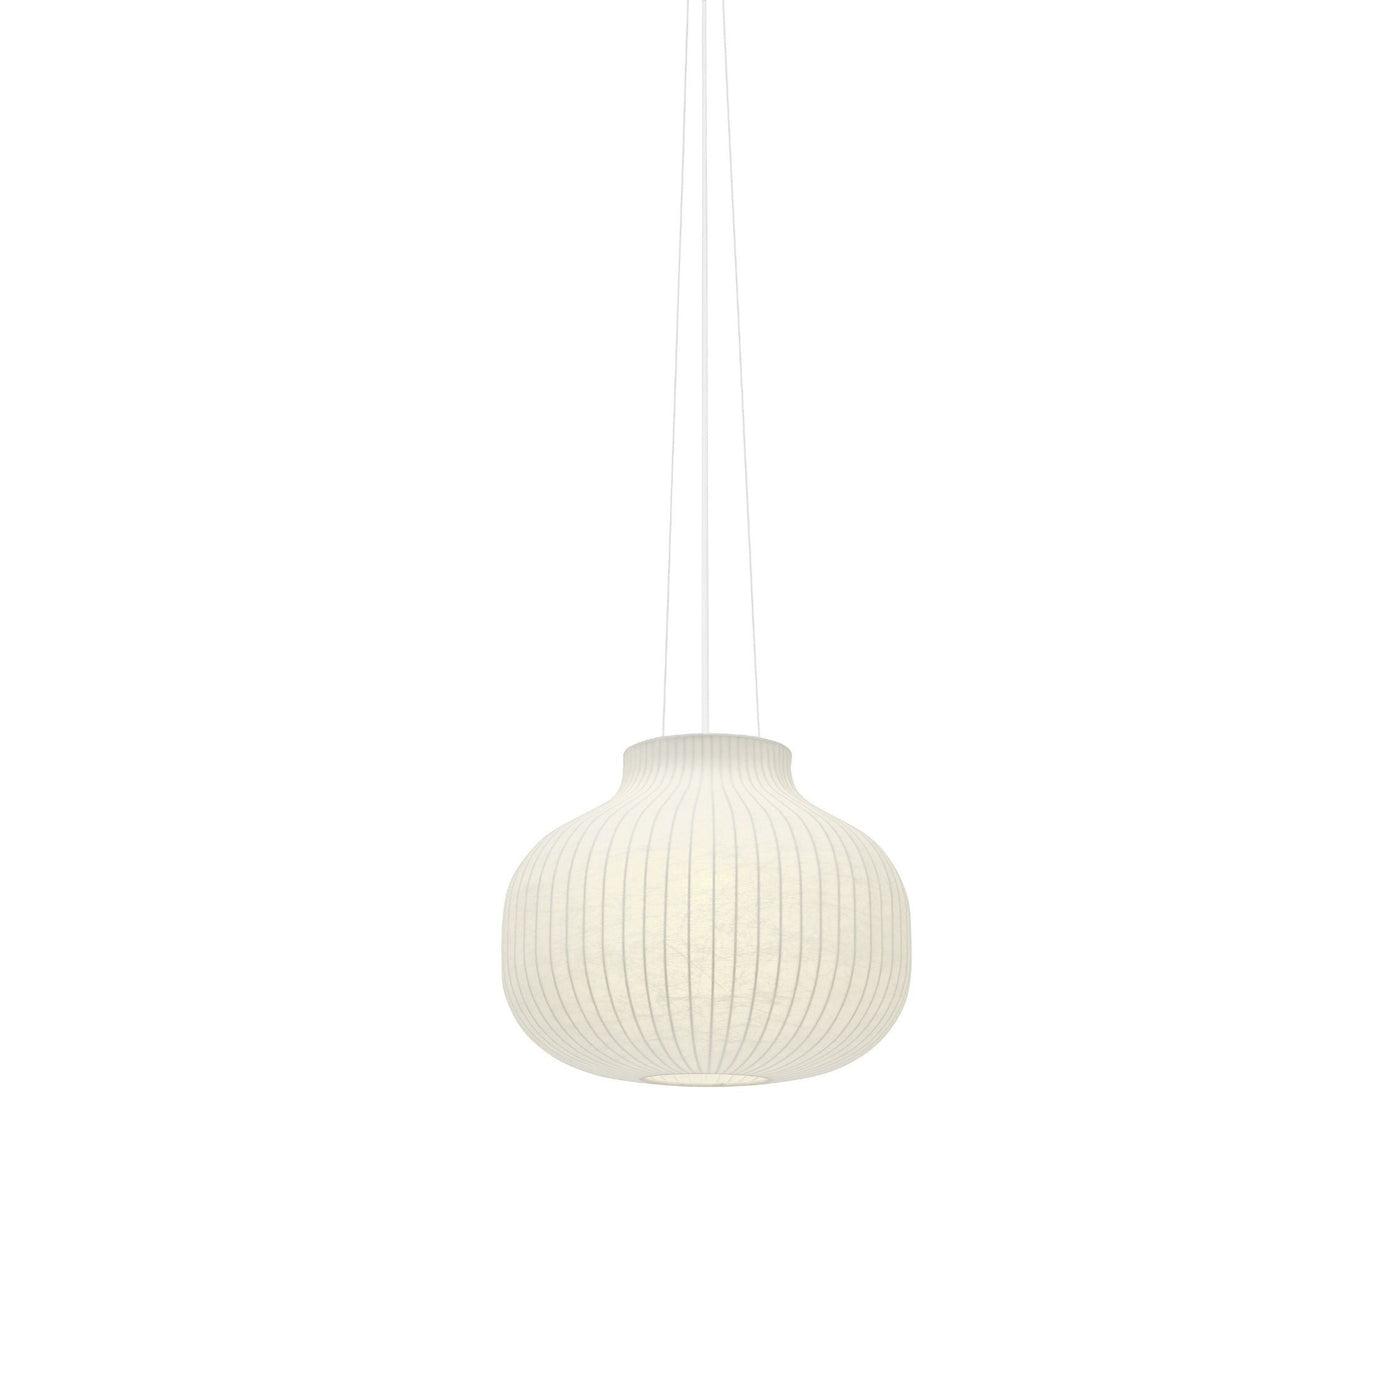 Muuto Ø45 closed ceiling pendant, available from someday designs